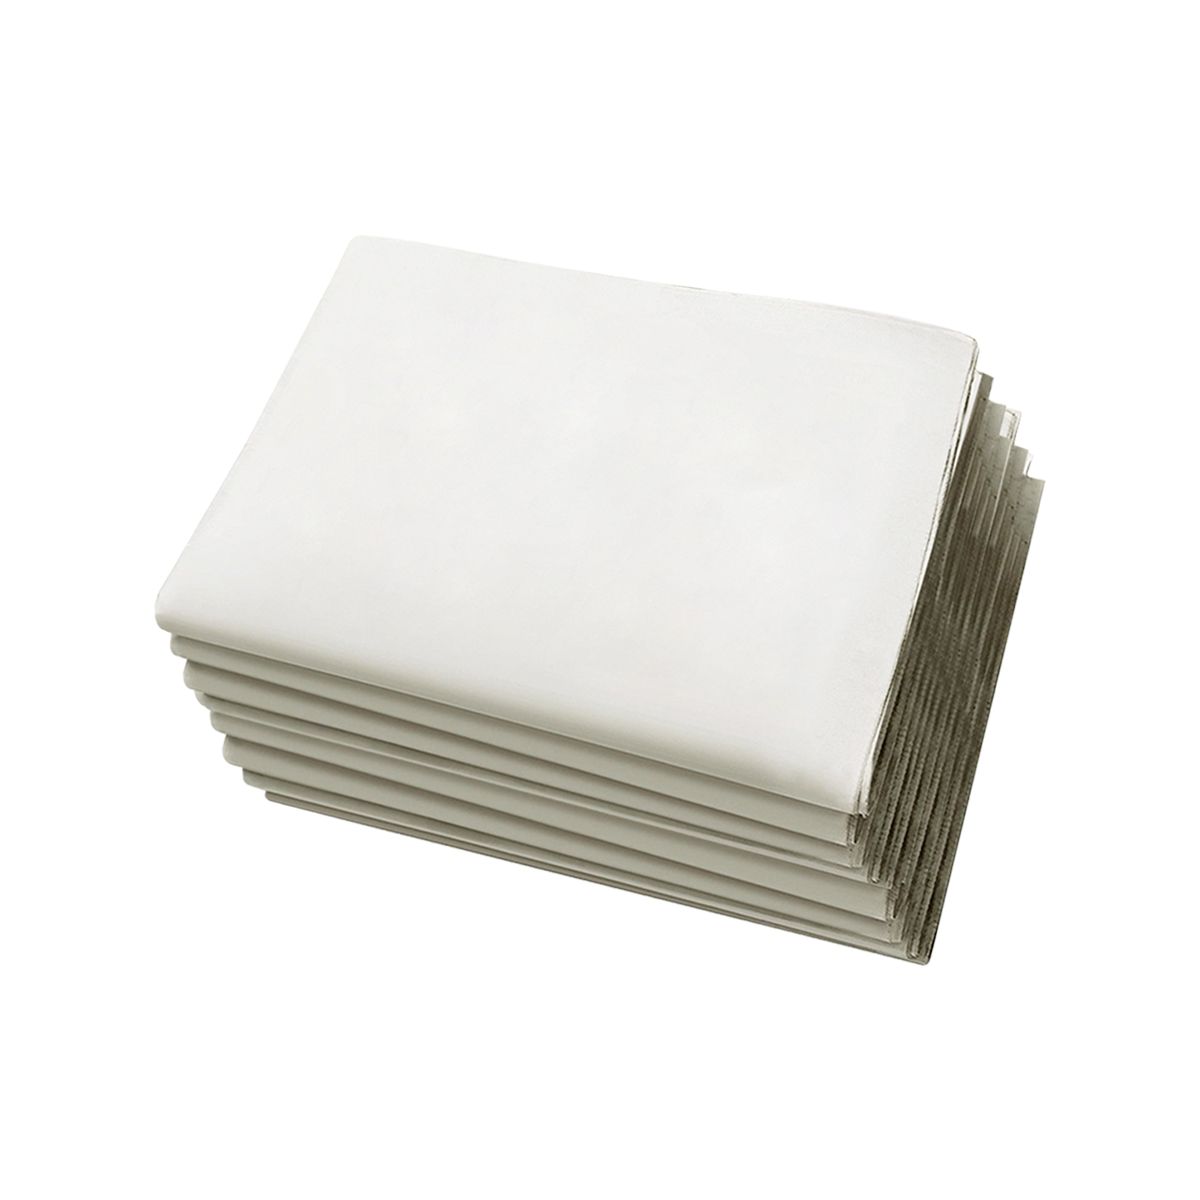 20 Lbs Newsprint Packing Paper for Moving - 400 Sheets